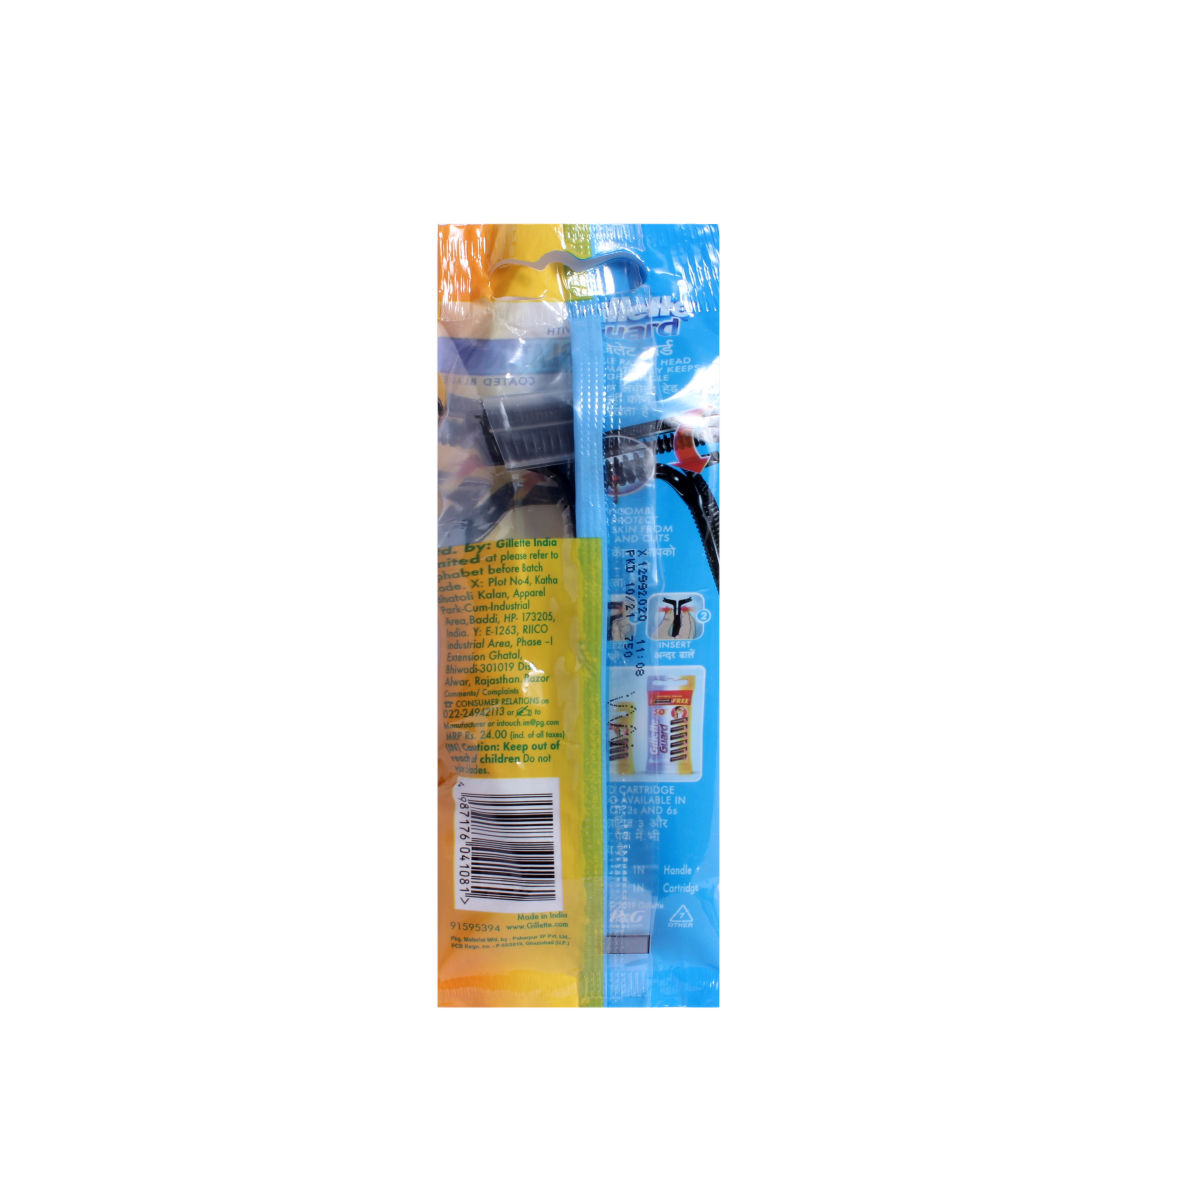 Gillette Guard 3 1 Razor + 2 Cartrides, 3 Count, Pack of 1 